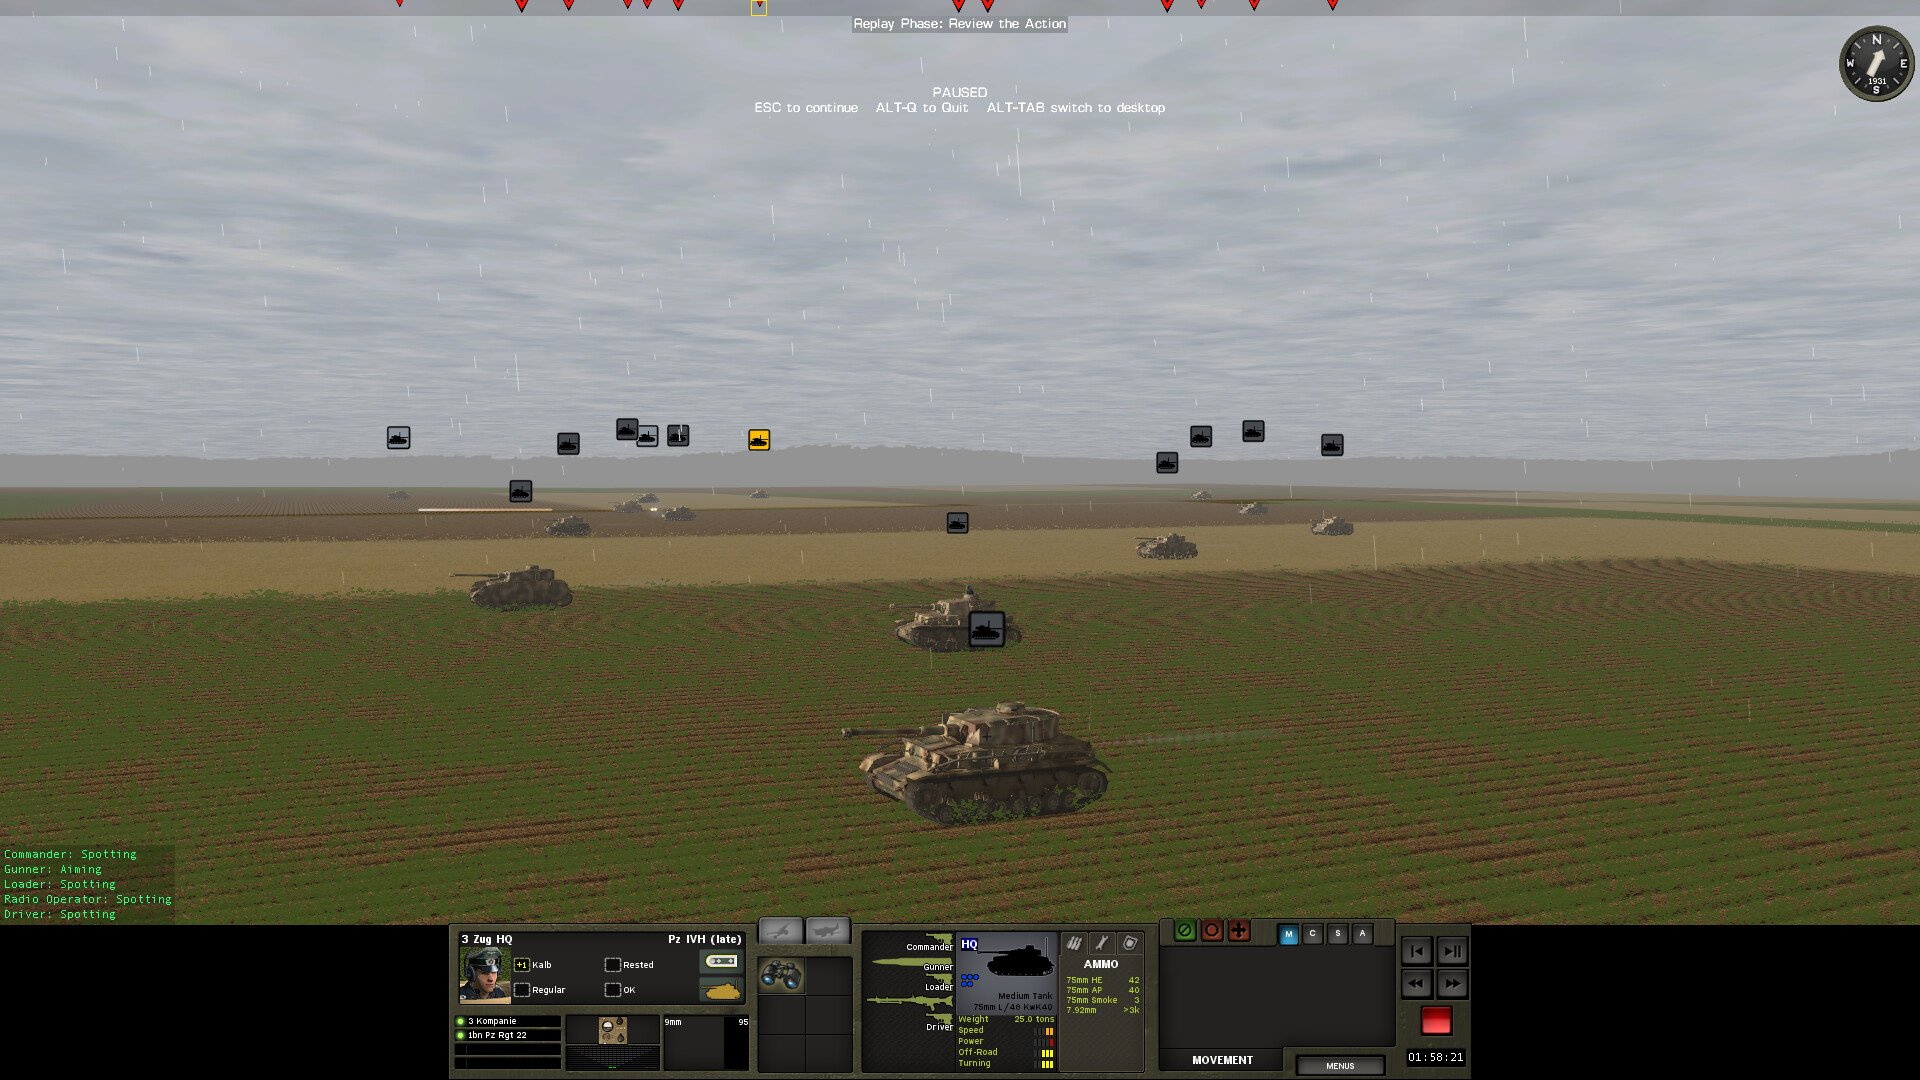 Combat Mission Battle for Normandy Commonwealth Forces 1